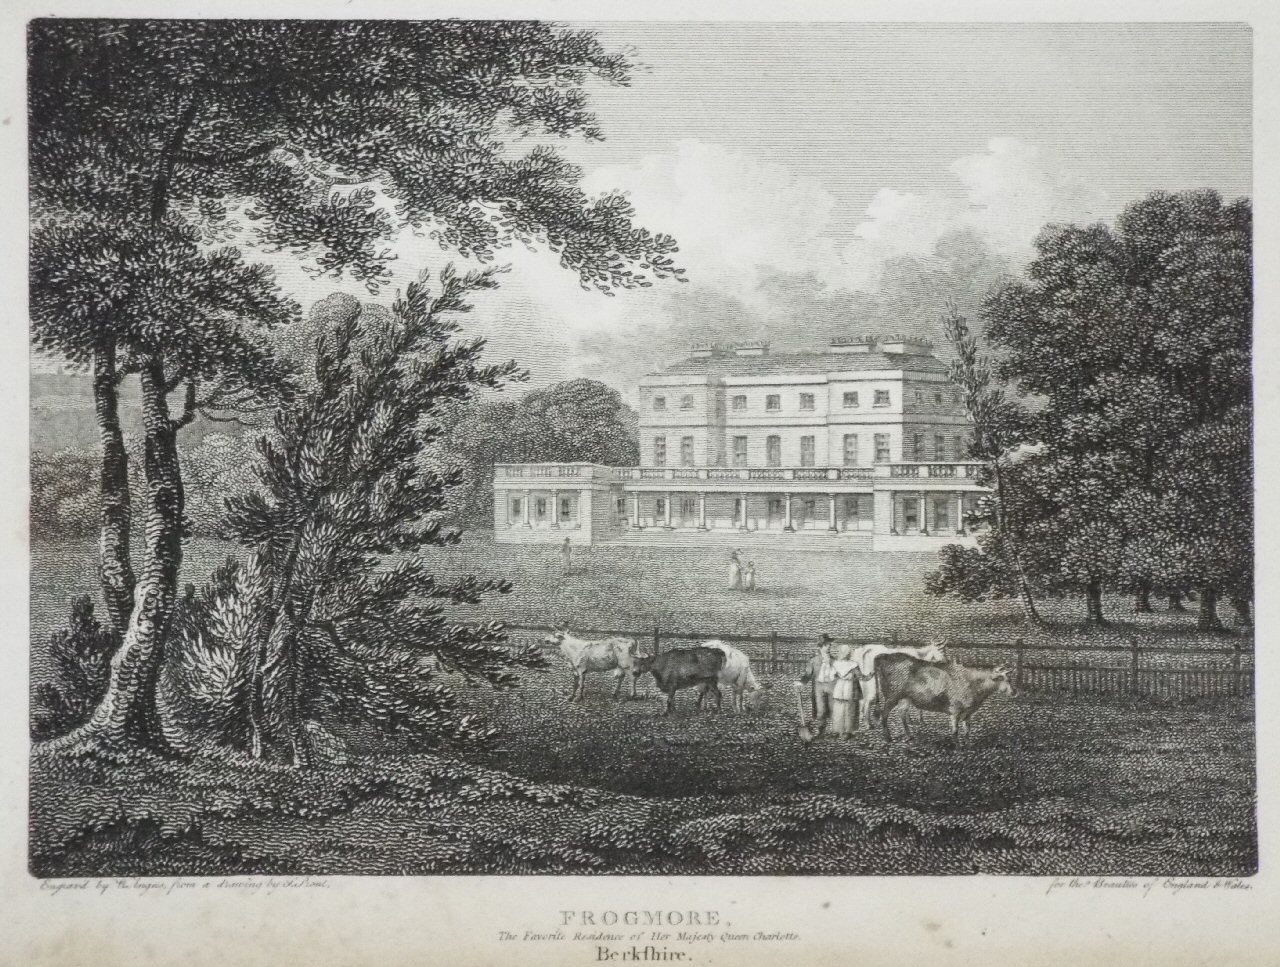 Print - Frogmore, the Favourite Rresidence of Her Majesty Queen Charlotte, Berkshire - Angus